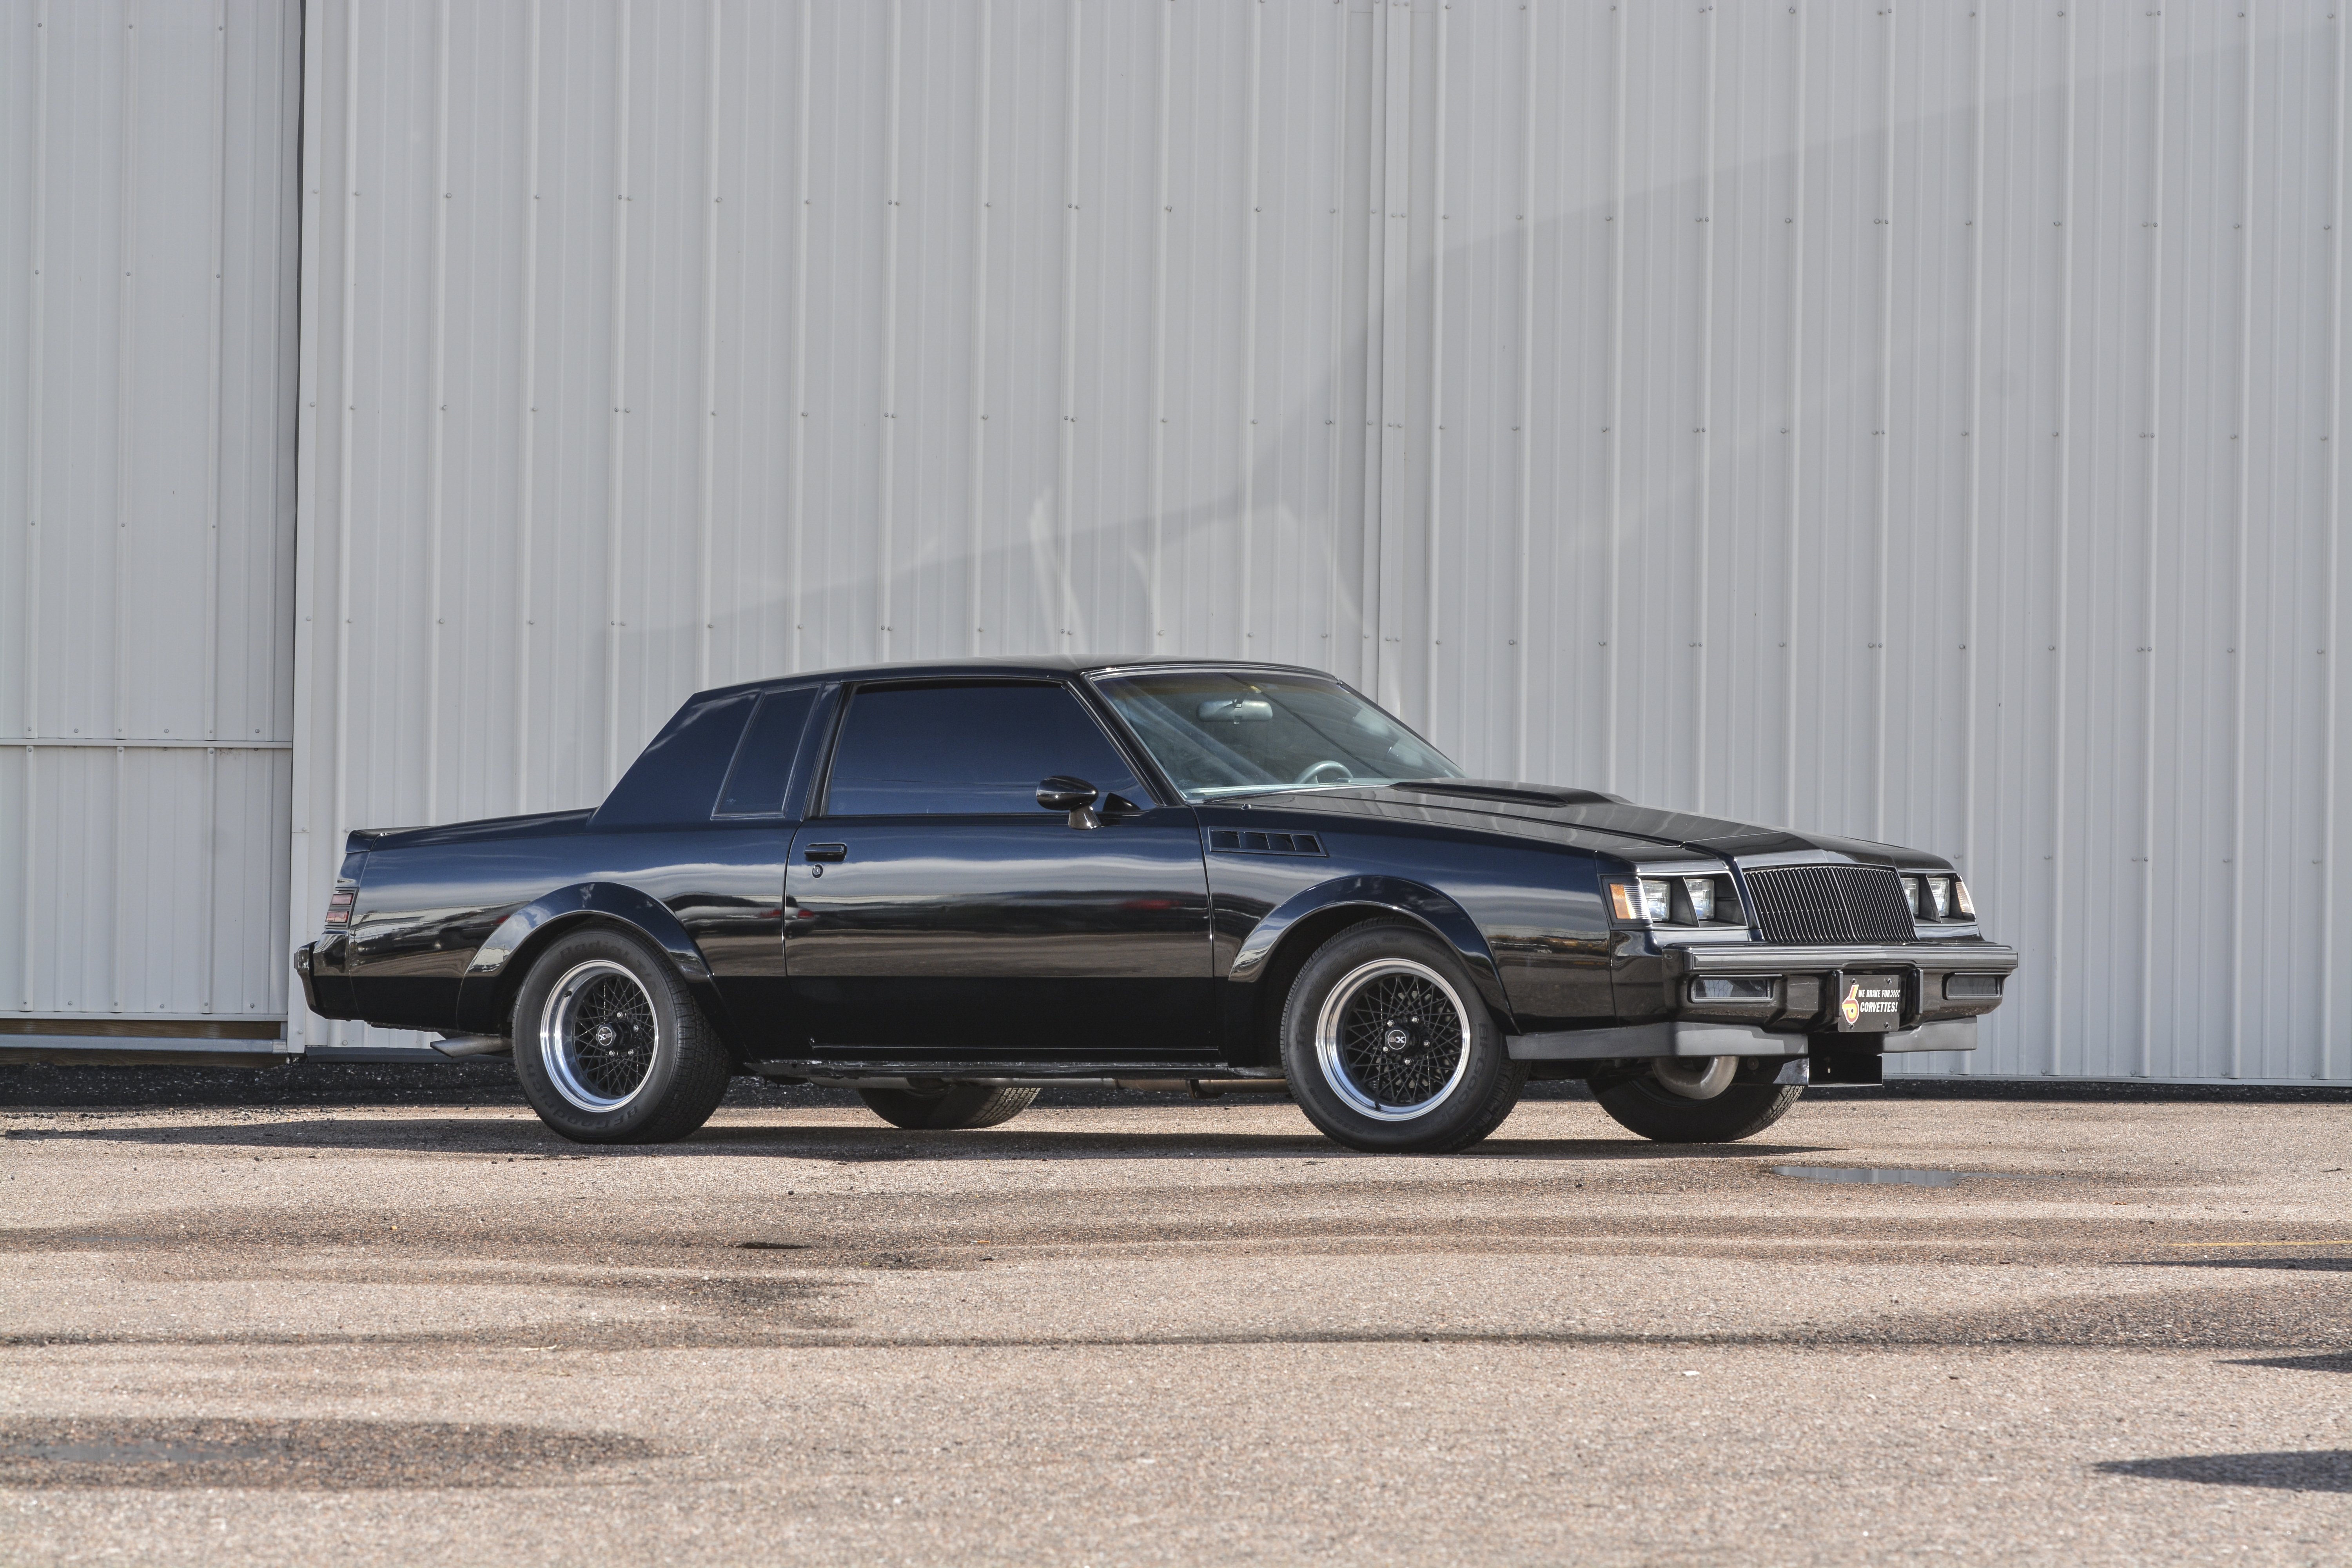 1987, Buick, Grand, National, Muscle, Classic, Old, Original, Black, Usa,  07 Wallpaper